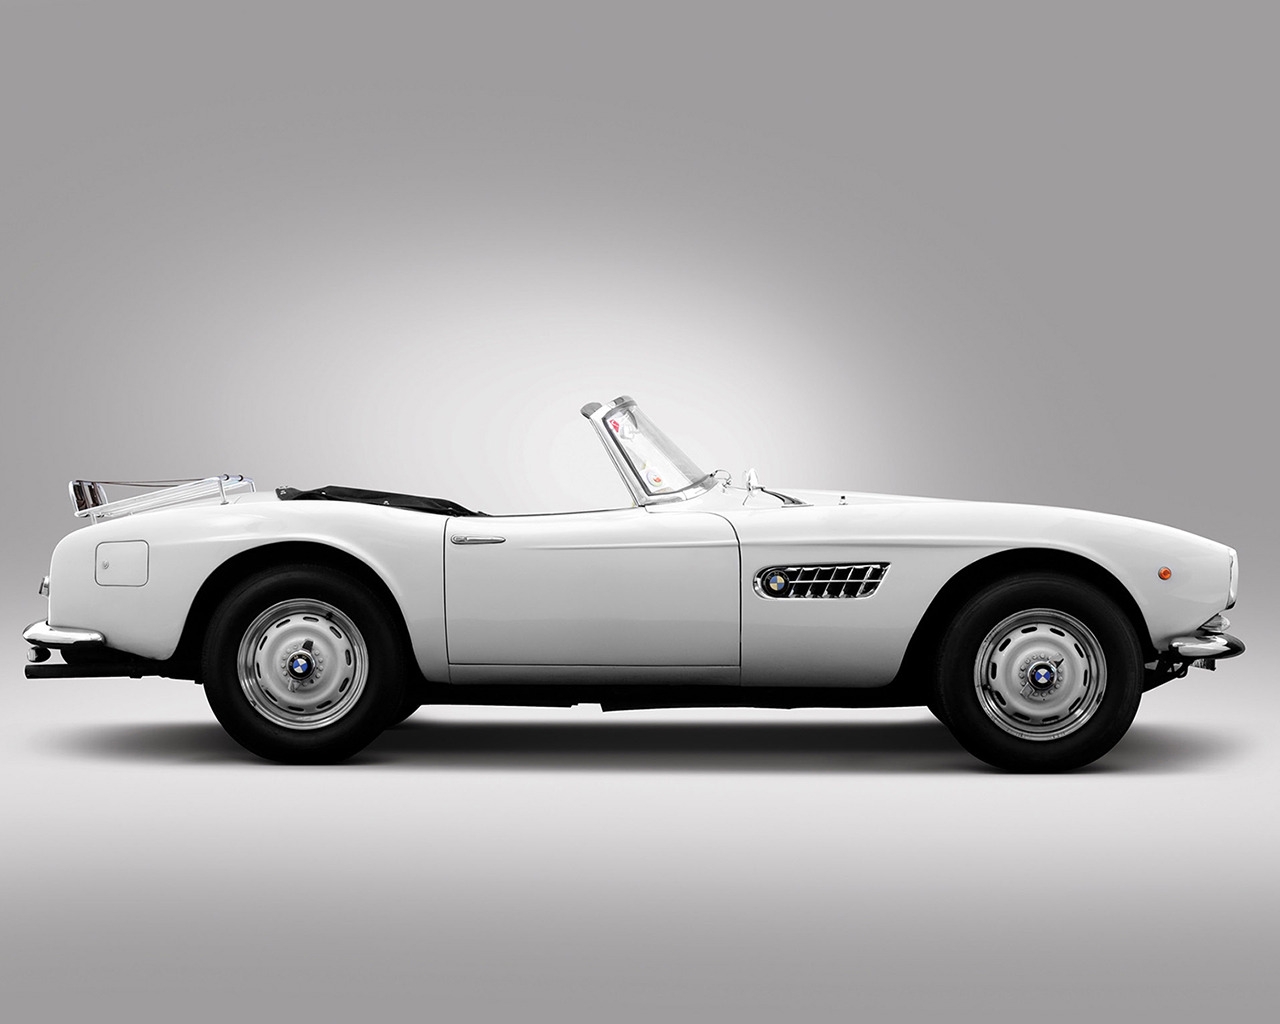 BMW 507 1957 for 1280 x 1024 resolution